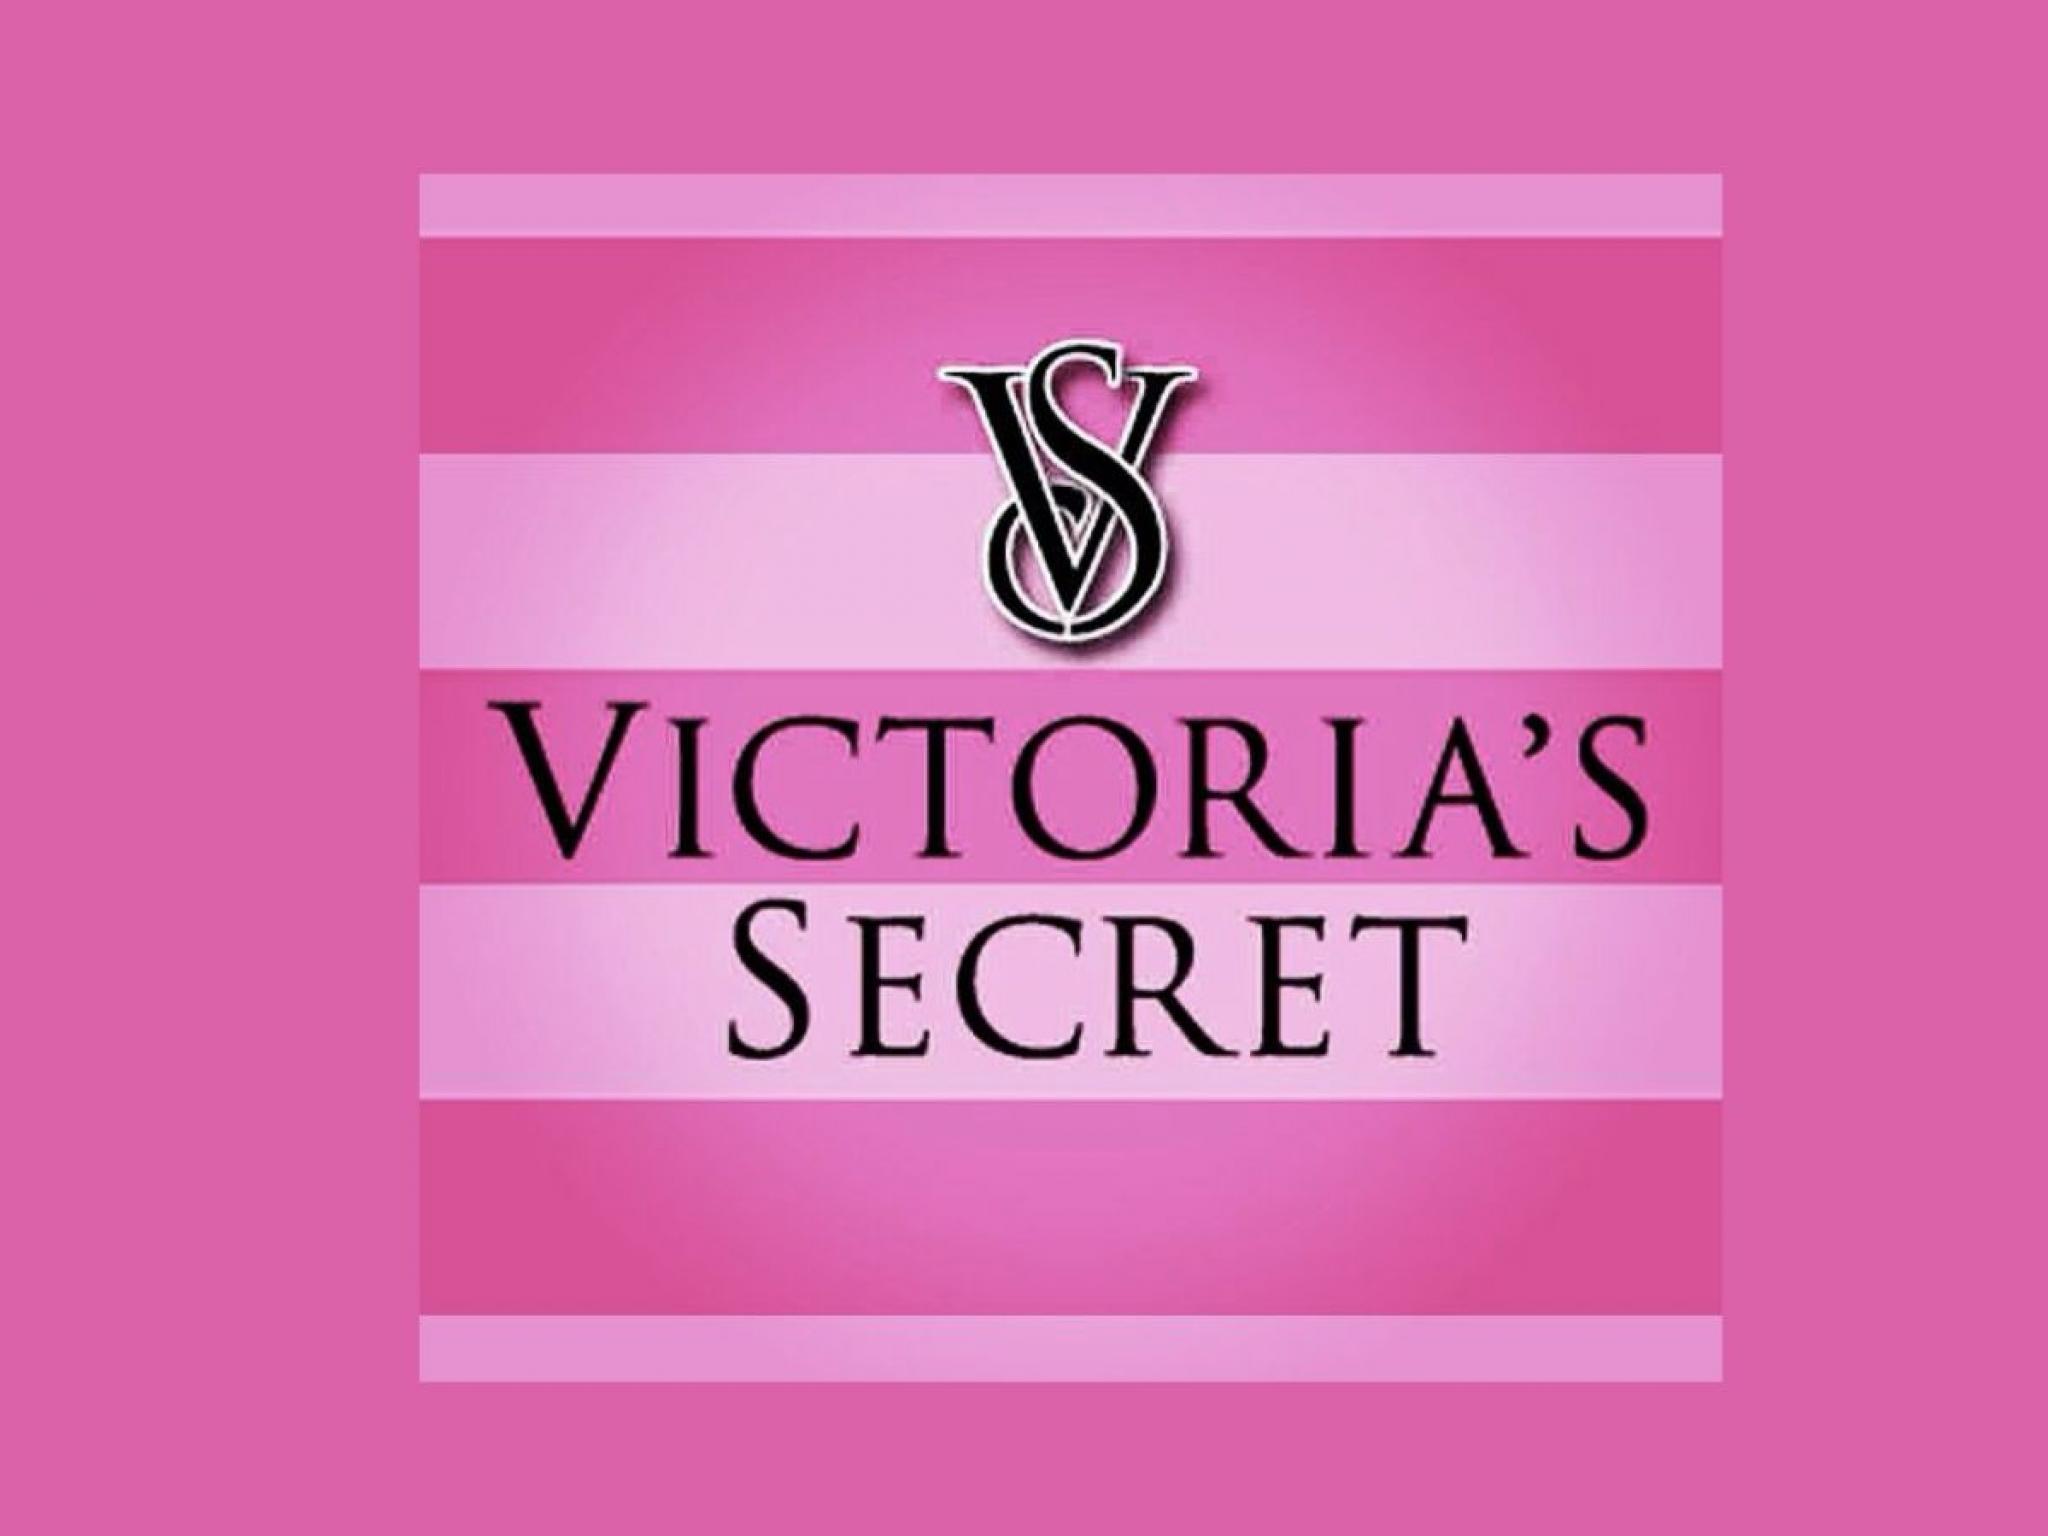  why-victorias-secret-shares-are-trading-lower-by-around-11-here-are-other-stocks-moving-in-thursdays-mid-day-session 